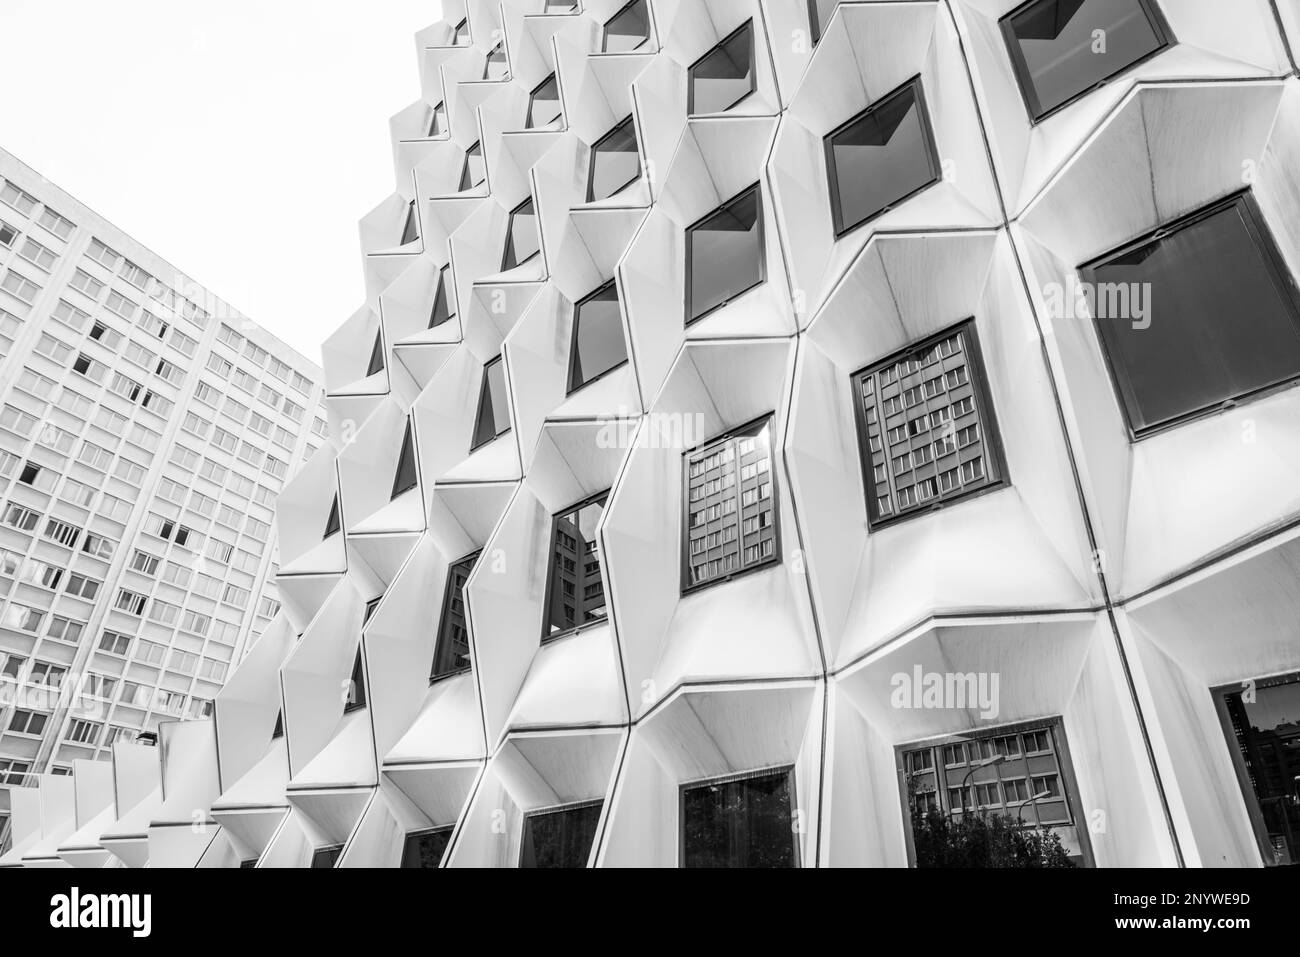 low angle black and white view of office building facades in the city center with characteristic architecture Stock Photo